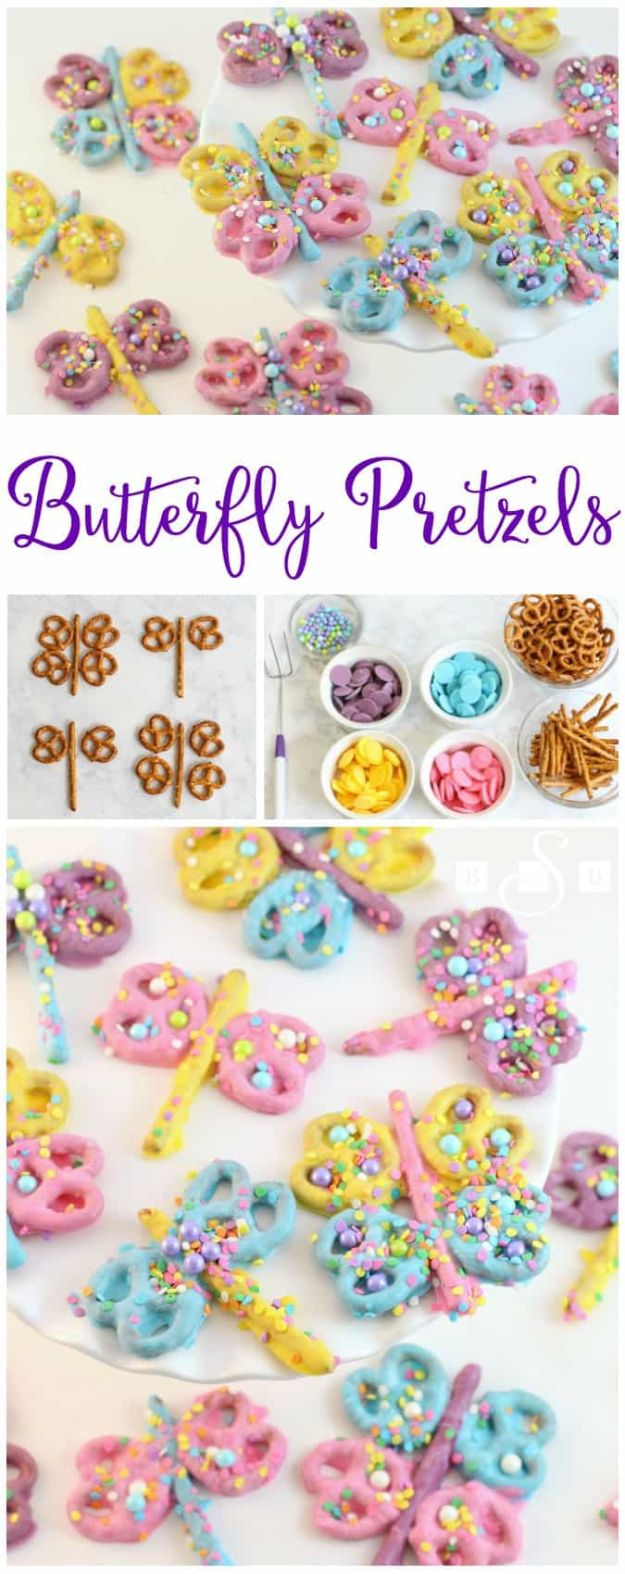 DIY Ideas With Butterflies - Butterfly Pretzels - Cute and Easy DIY Projects for Butterfly Lovers - Wall and Home Decor Projects, Things To Make and Sell on Etsy - Quick Gifts to Make for Friends and Family - Homemade No Sew Projects- Fun Jewelry, Cool Clothes and Accessories #diyideas #butterflies #teencrafts